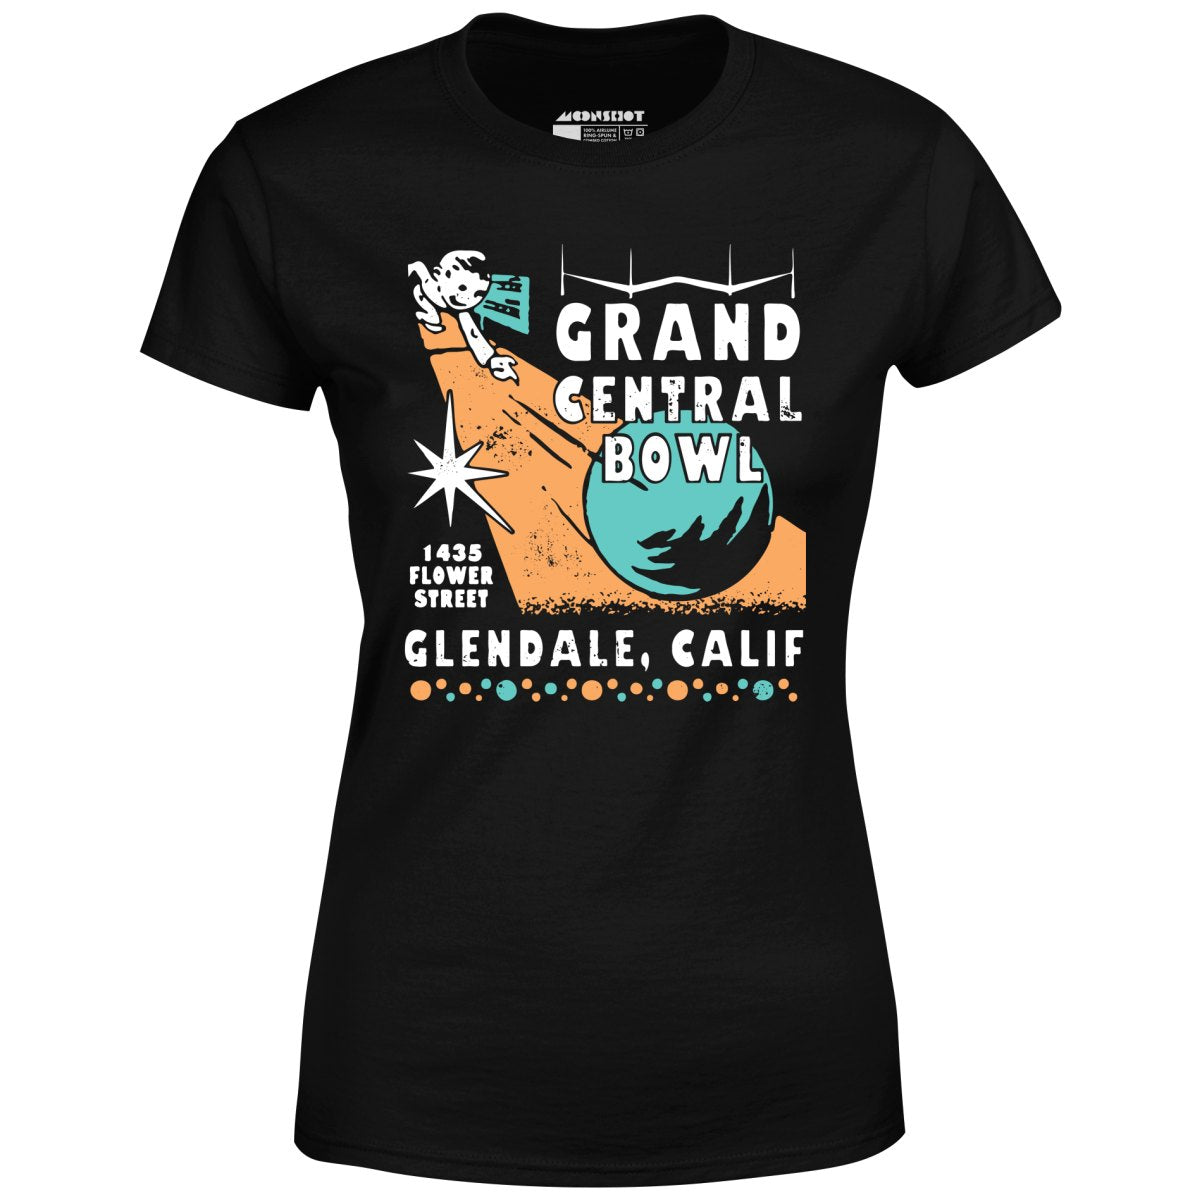 Grand Central Bowl - Glendale, CA - Vintage Bowling Alley - Women's T-Shirt